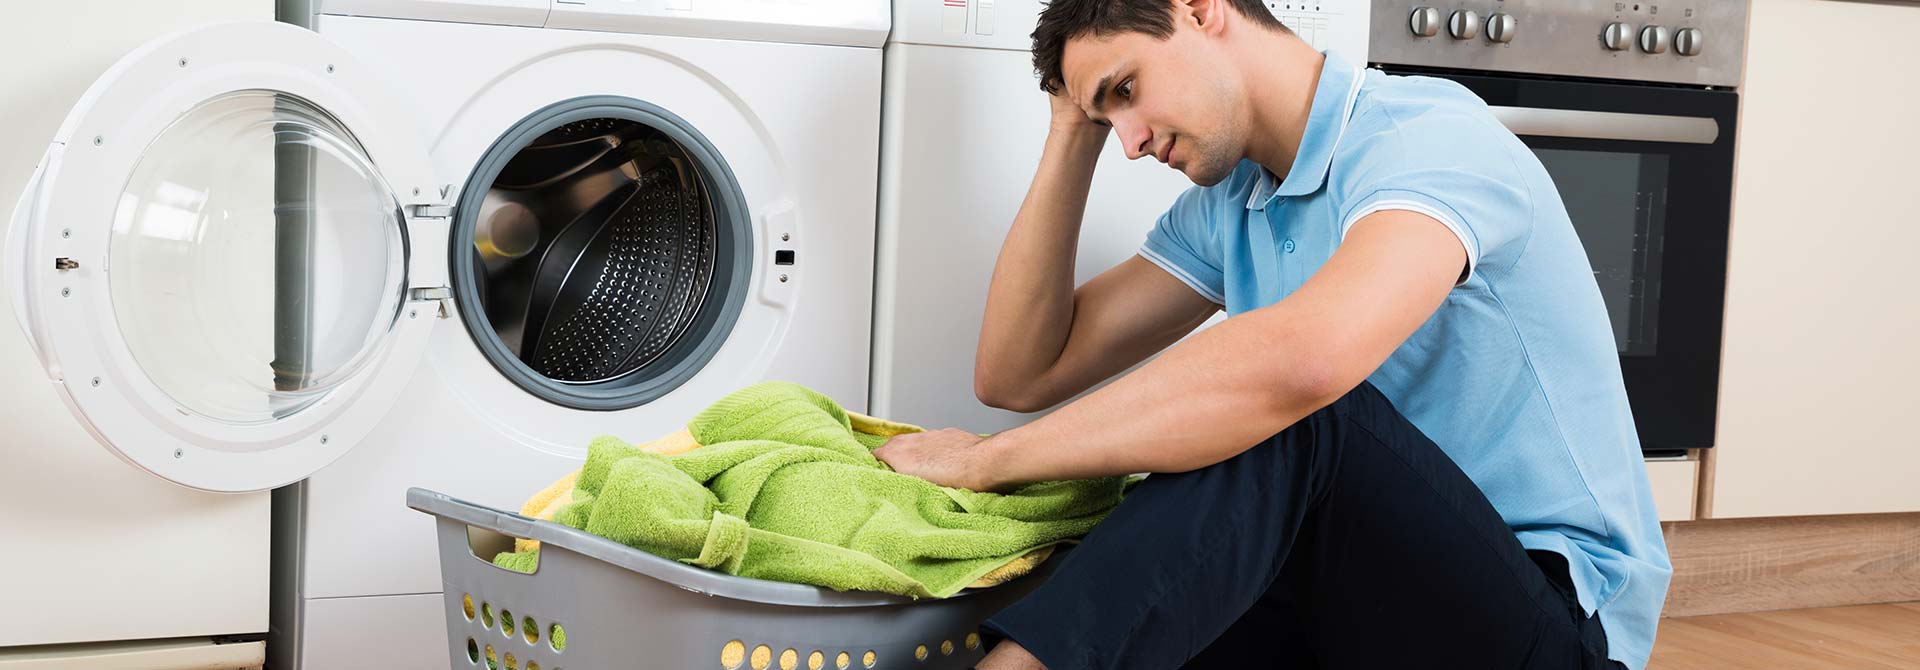 Why My Washing Machine Is Not Spinning - Just Fixed